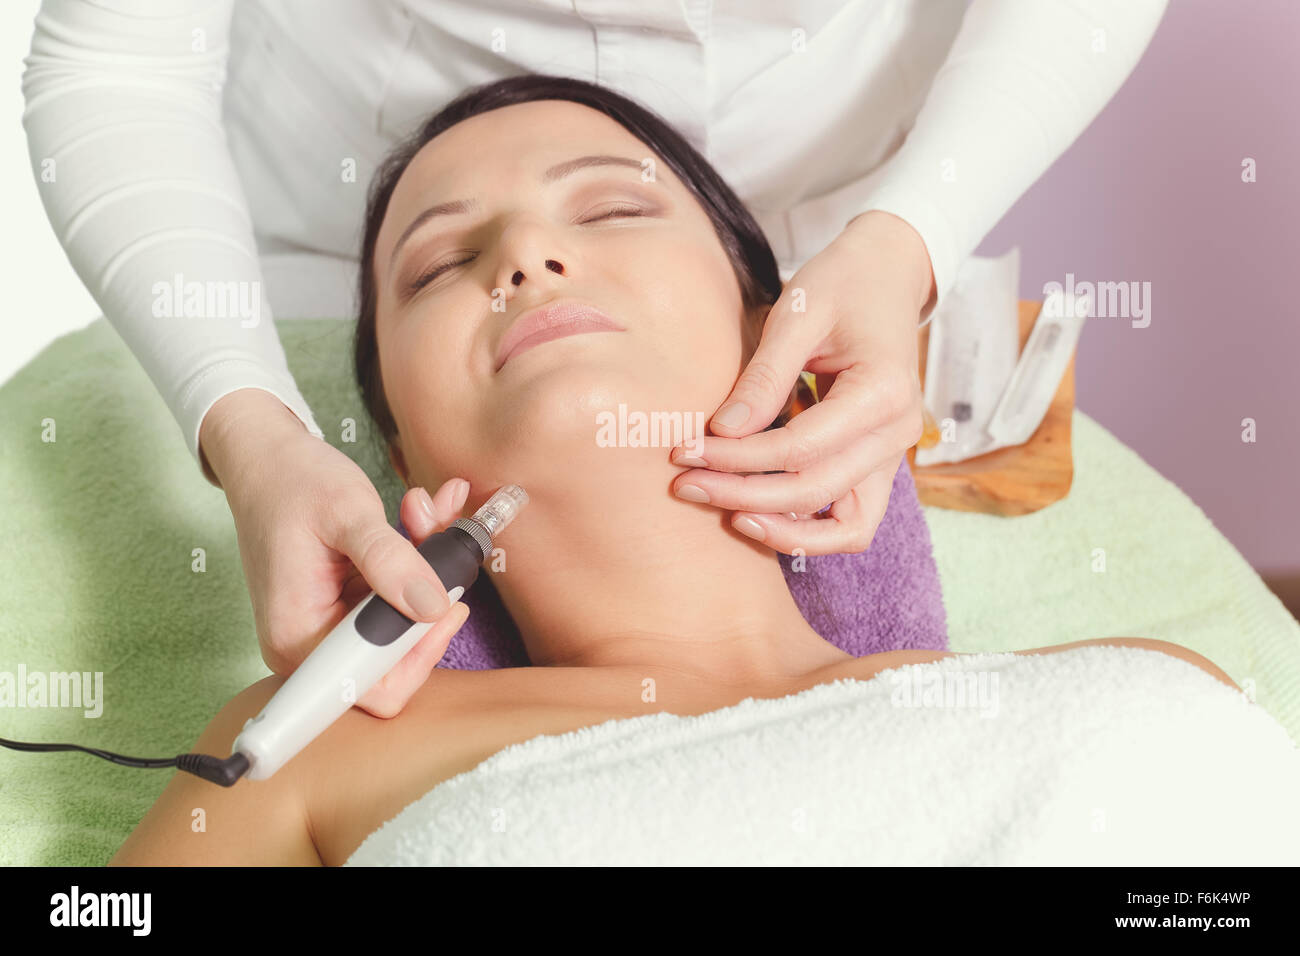 Mesotherapy, anti ageing treatment. Woman having mesotherapy facial treatment at beauty salon Stock Photo